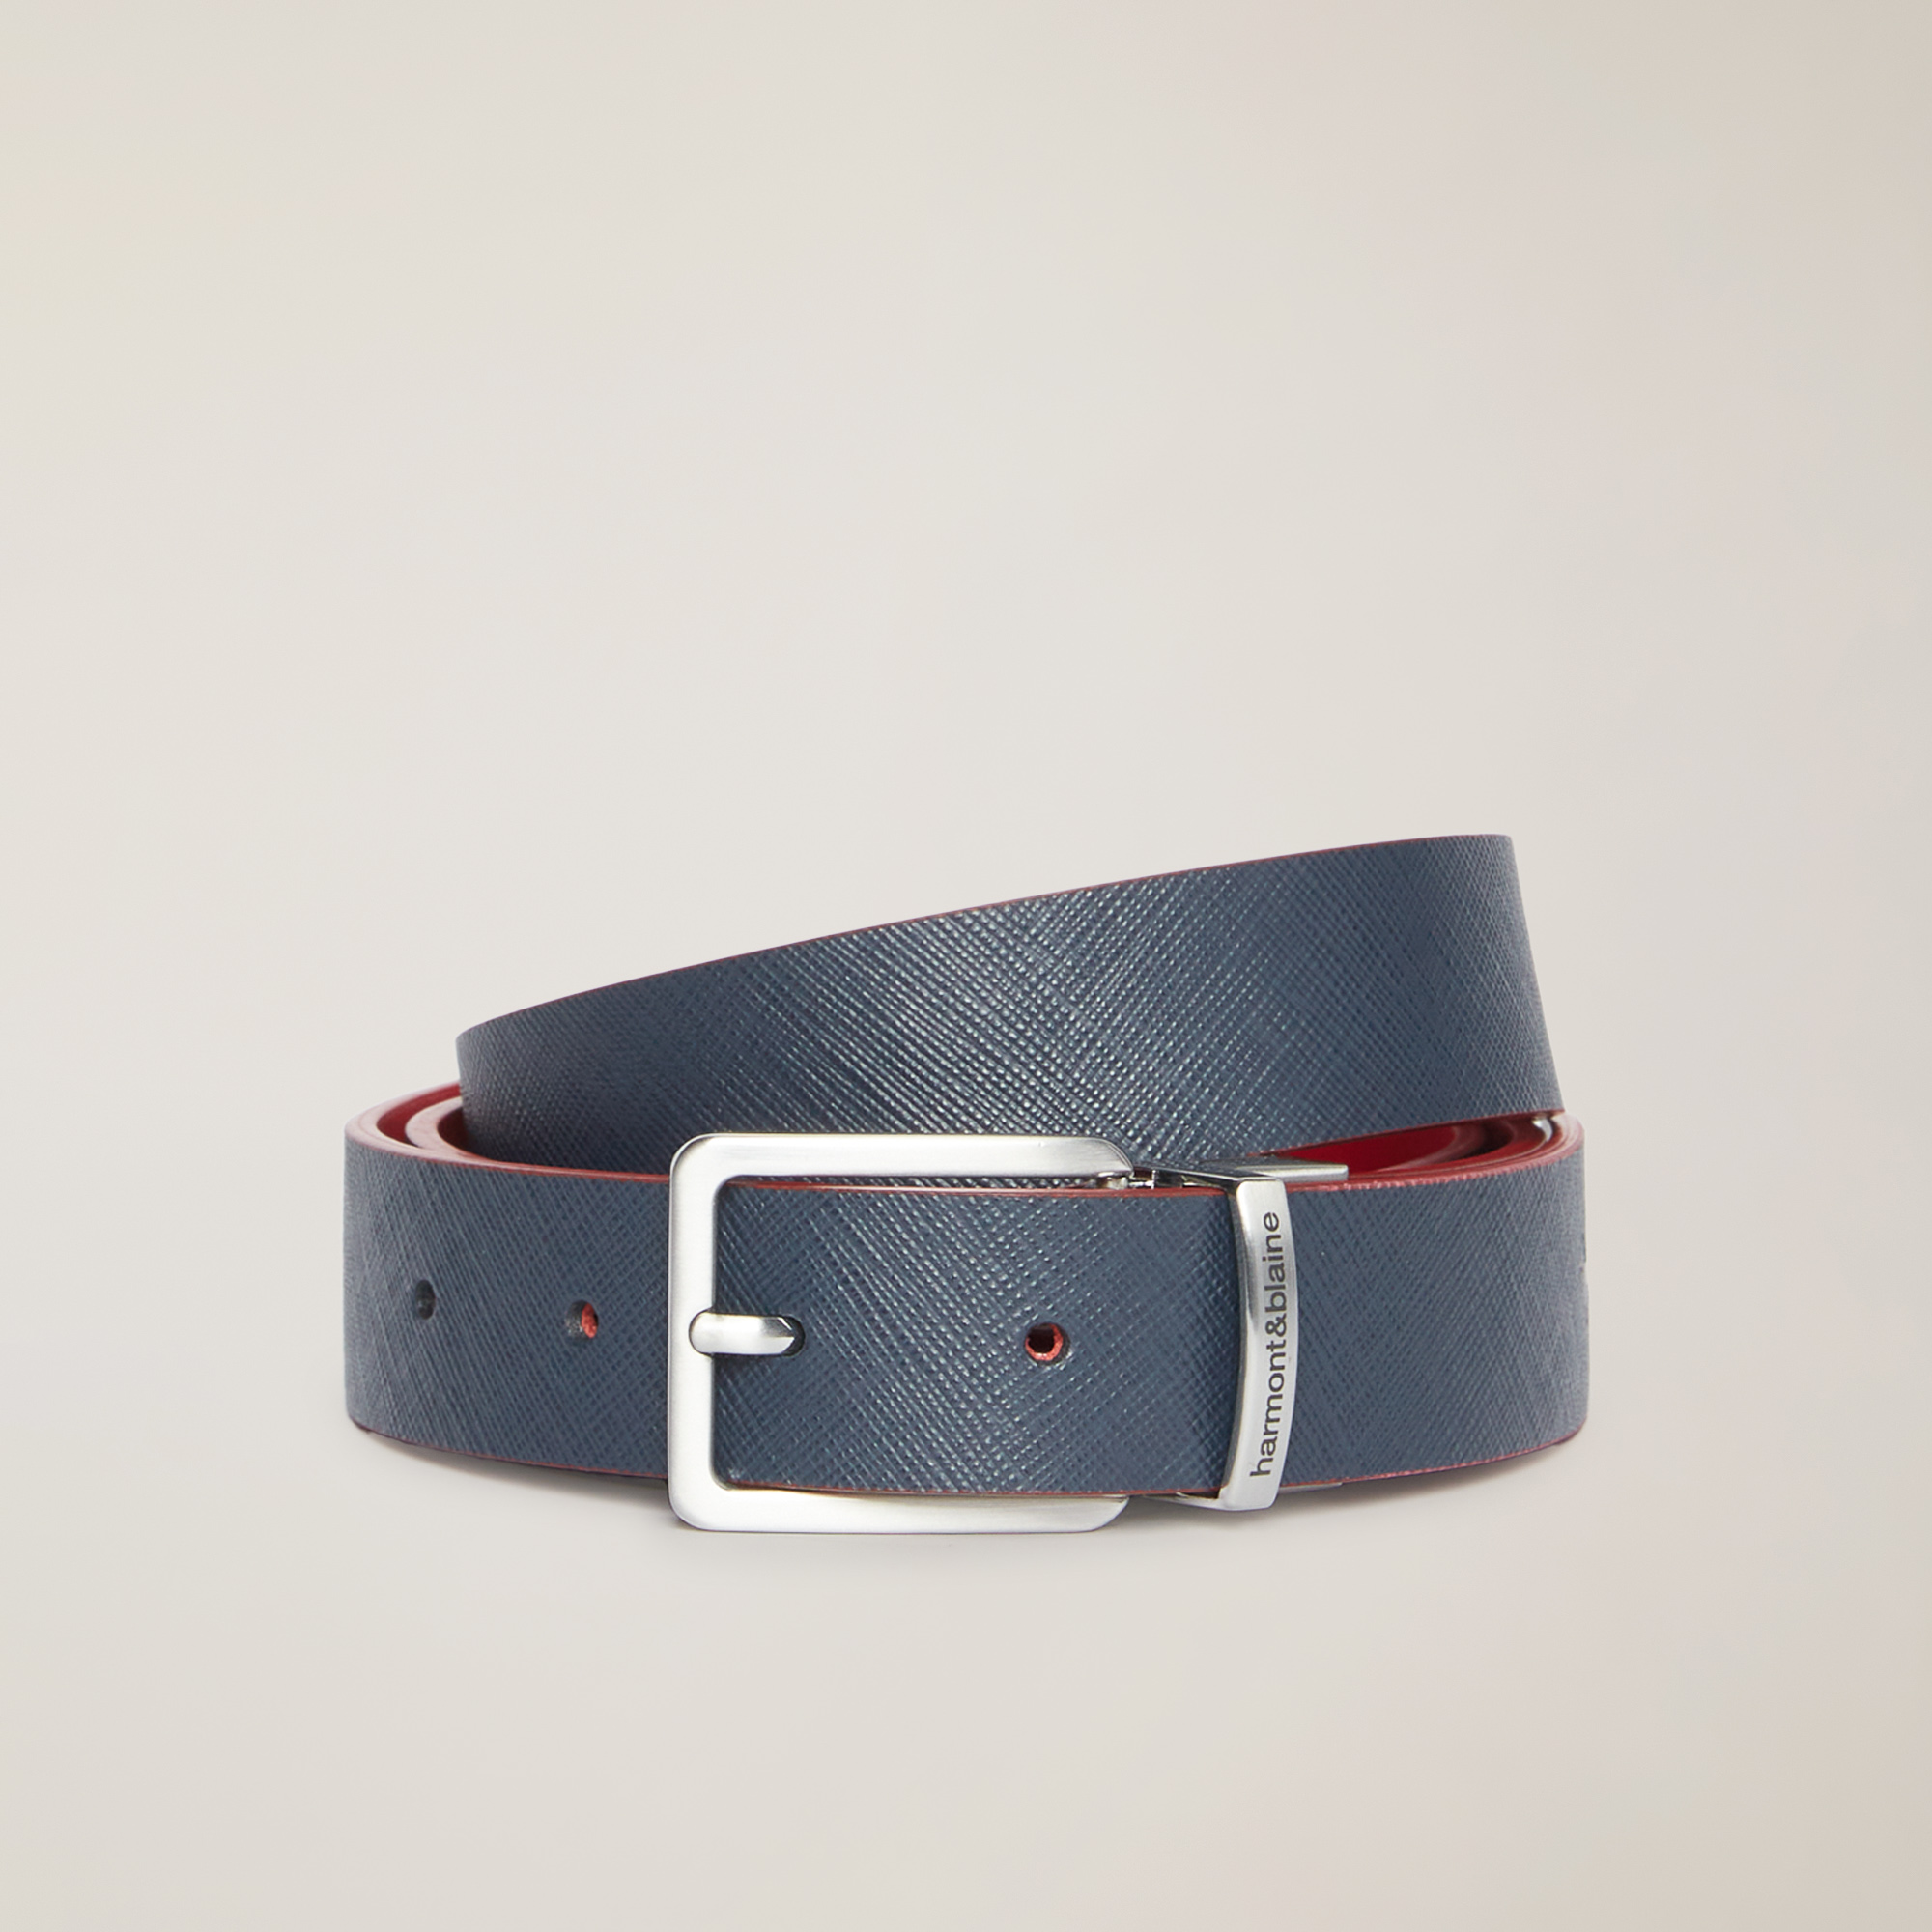 Two-Tone Belt With Lettering, Blue/Red, large image number 0